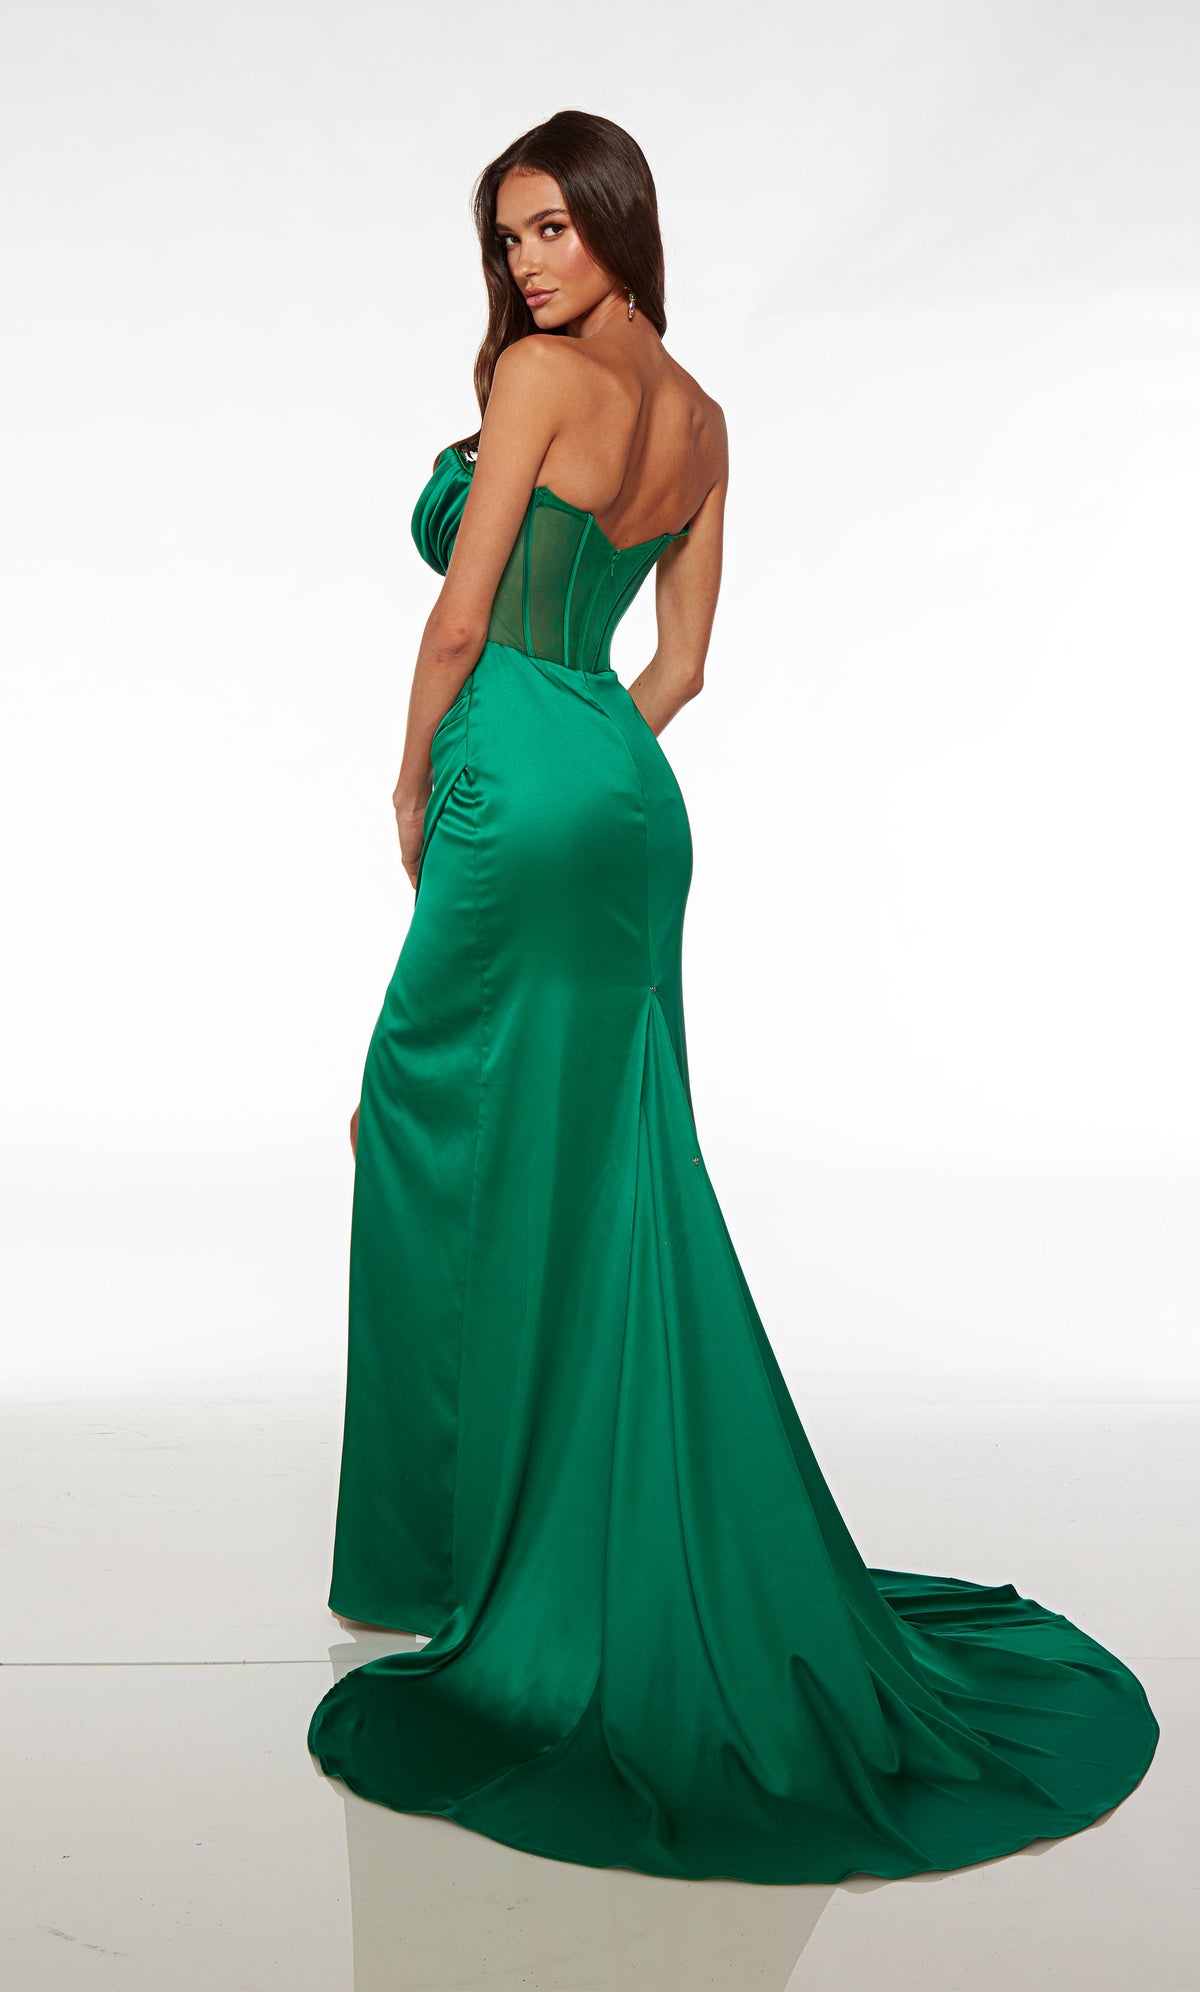 Emerald green satin prom dress: Off-the-shoulder cowl neckline, detachable straps, sheer corset bodice, gathered skirt detail, and an elegant long train.